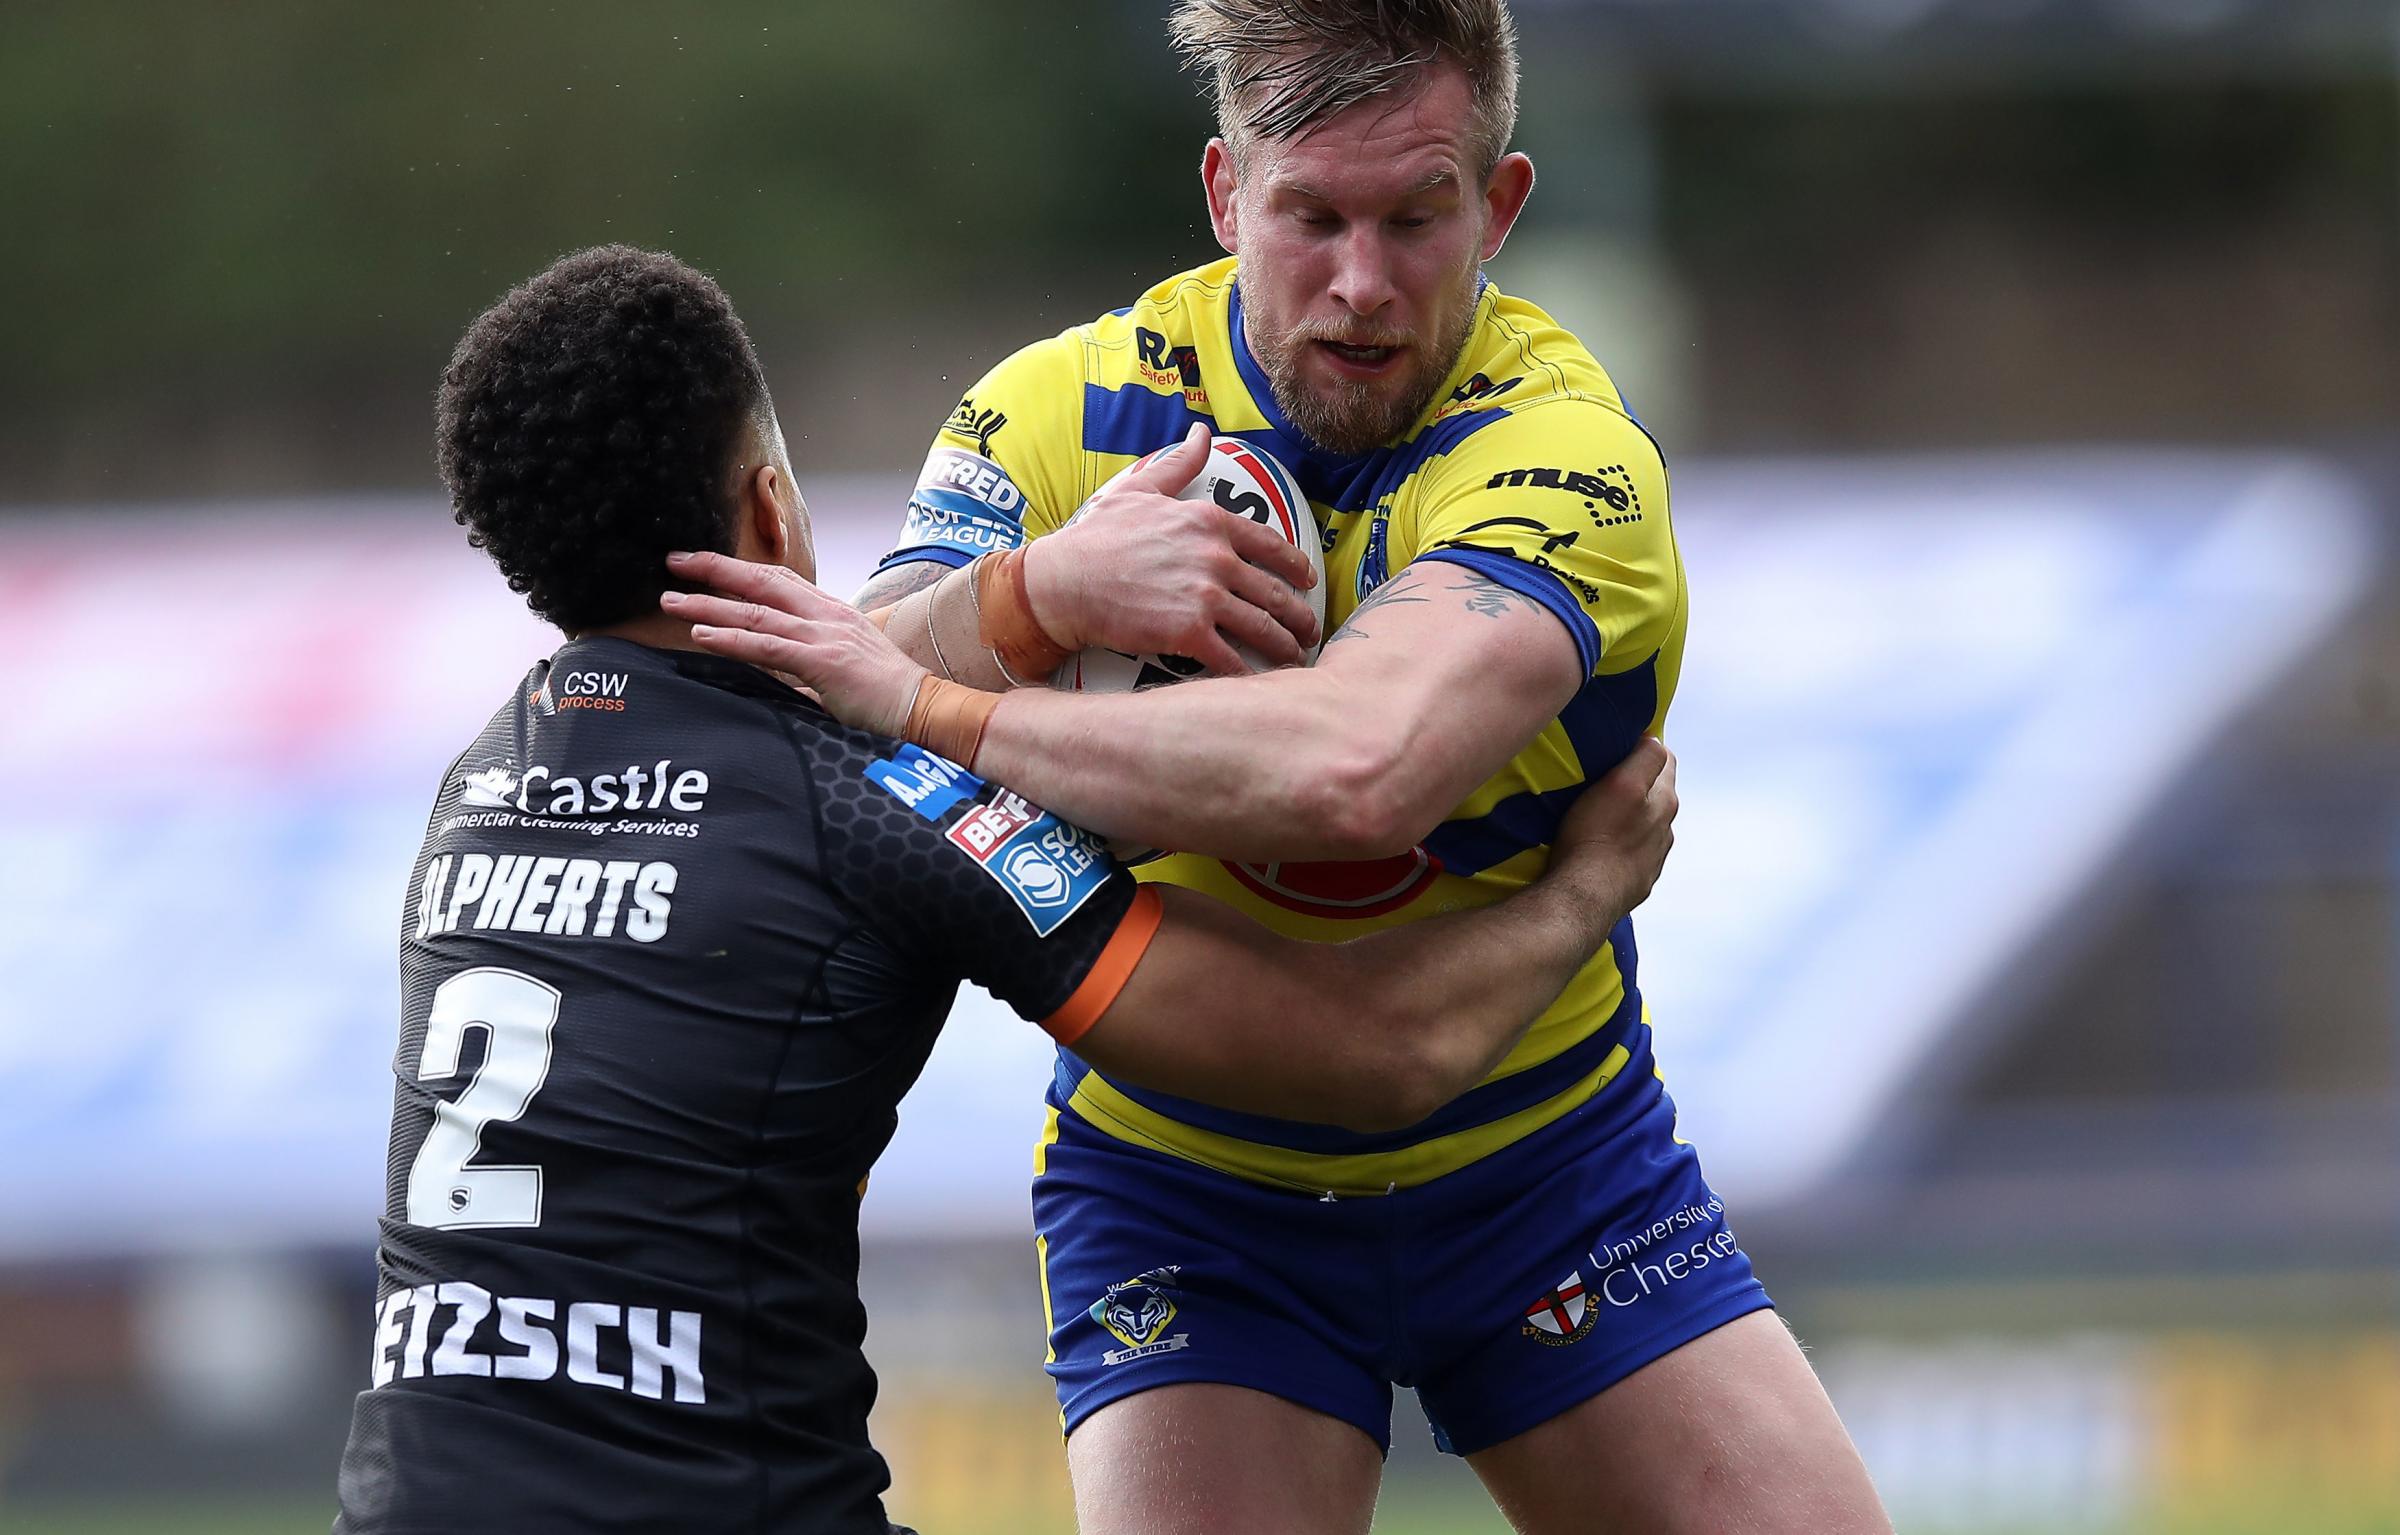 Cooper in action against Castleford on Sunday. Picture by PA Wire